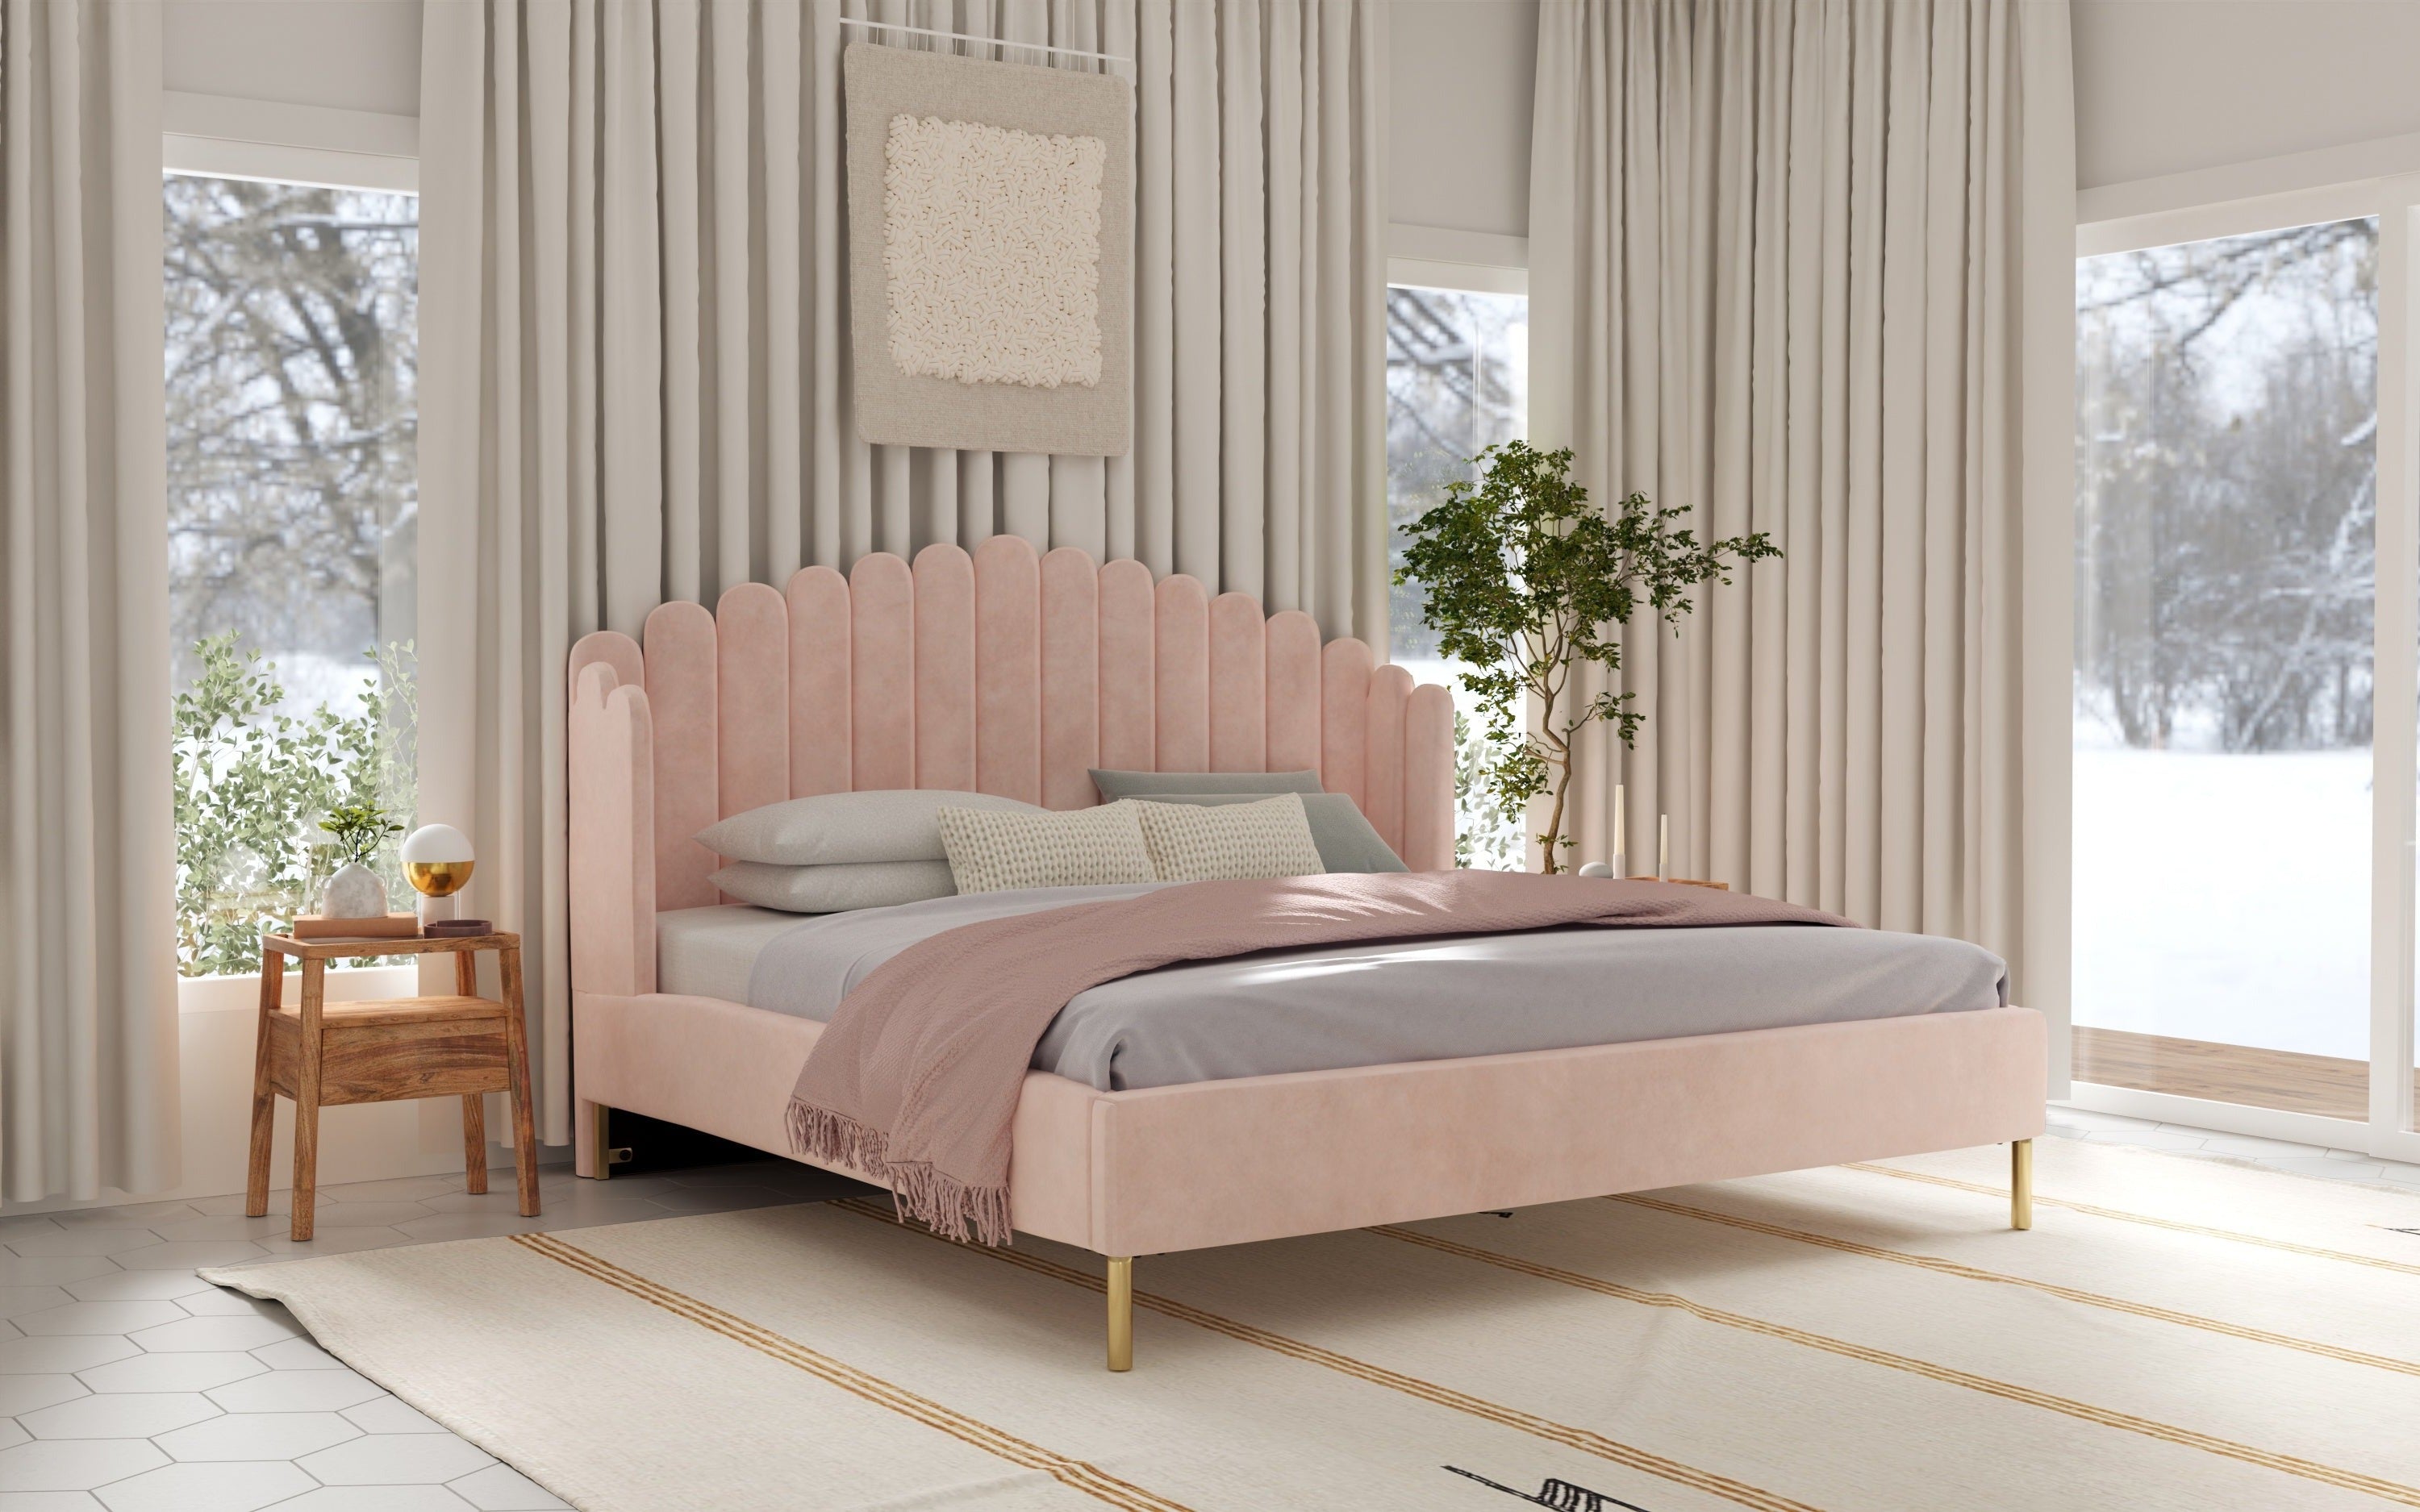 Luxury bedroom in soft pastels with ample sunlight